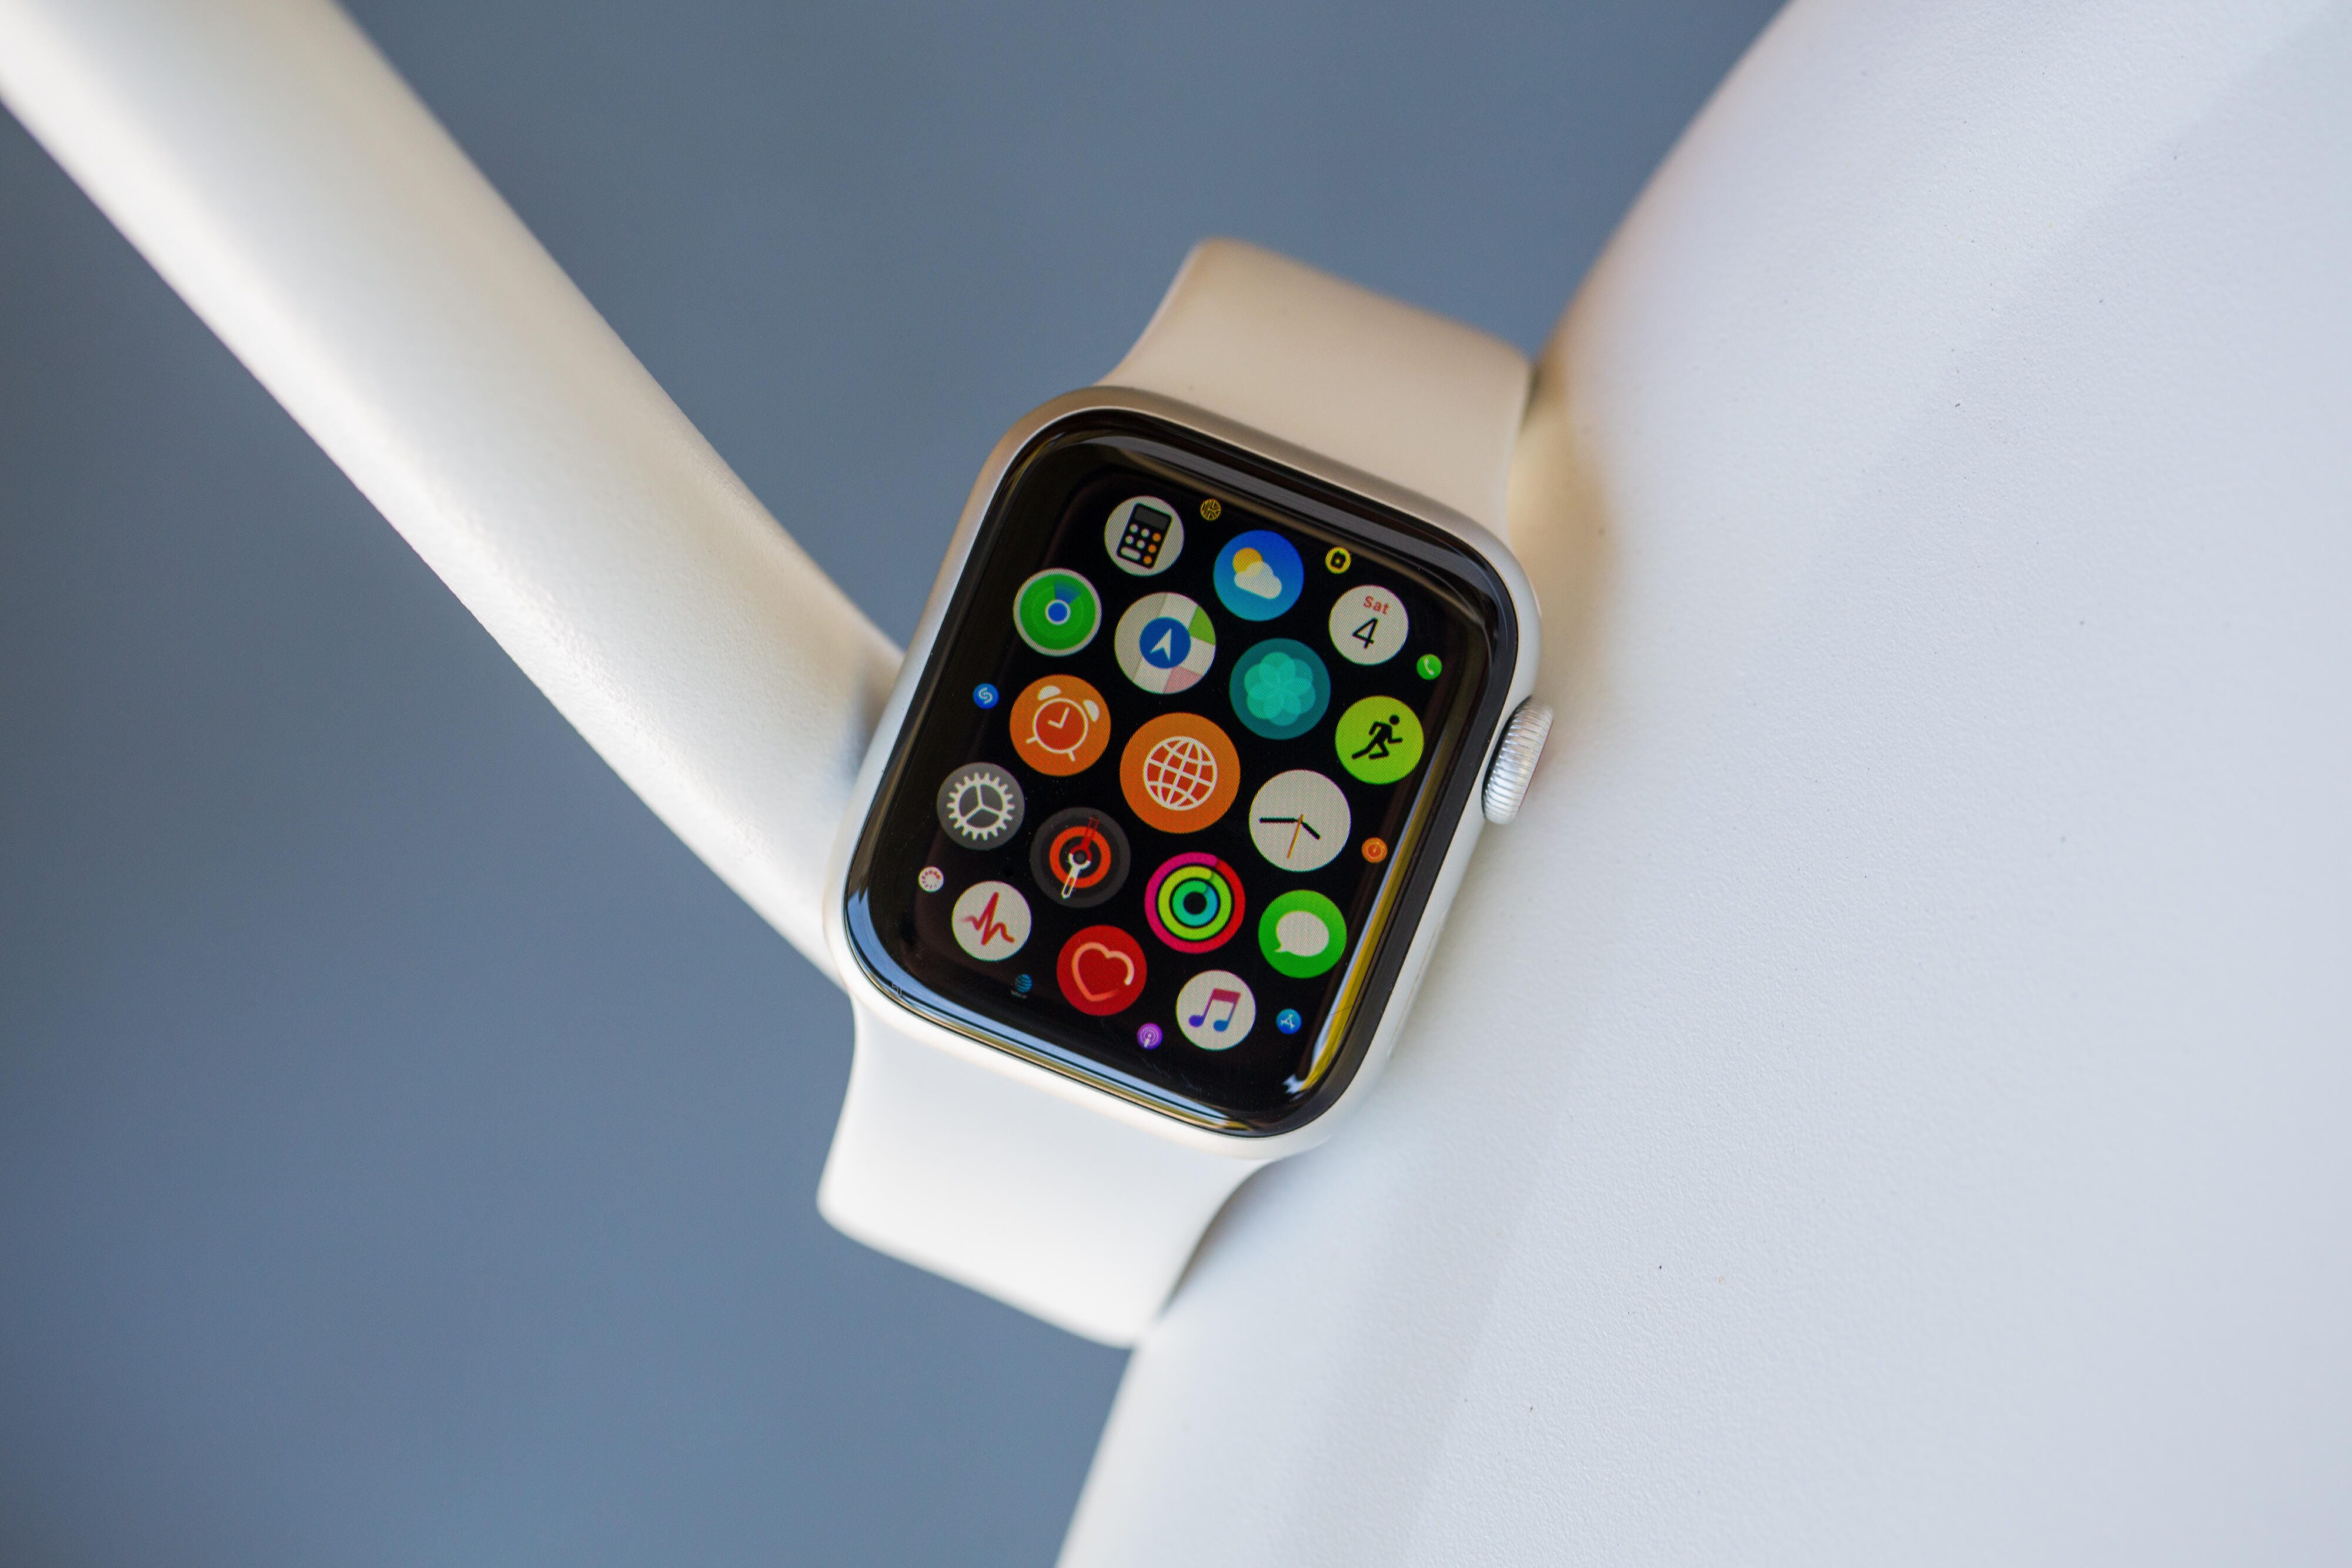 WatchOS 7 public beta: How to sign up and install it on your Apple Watch right now